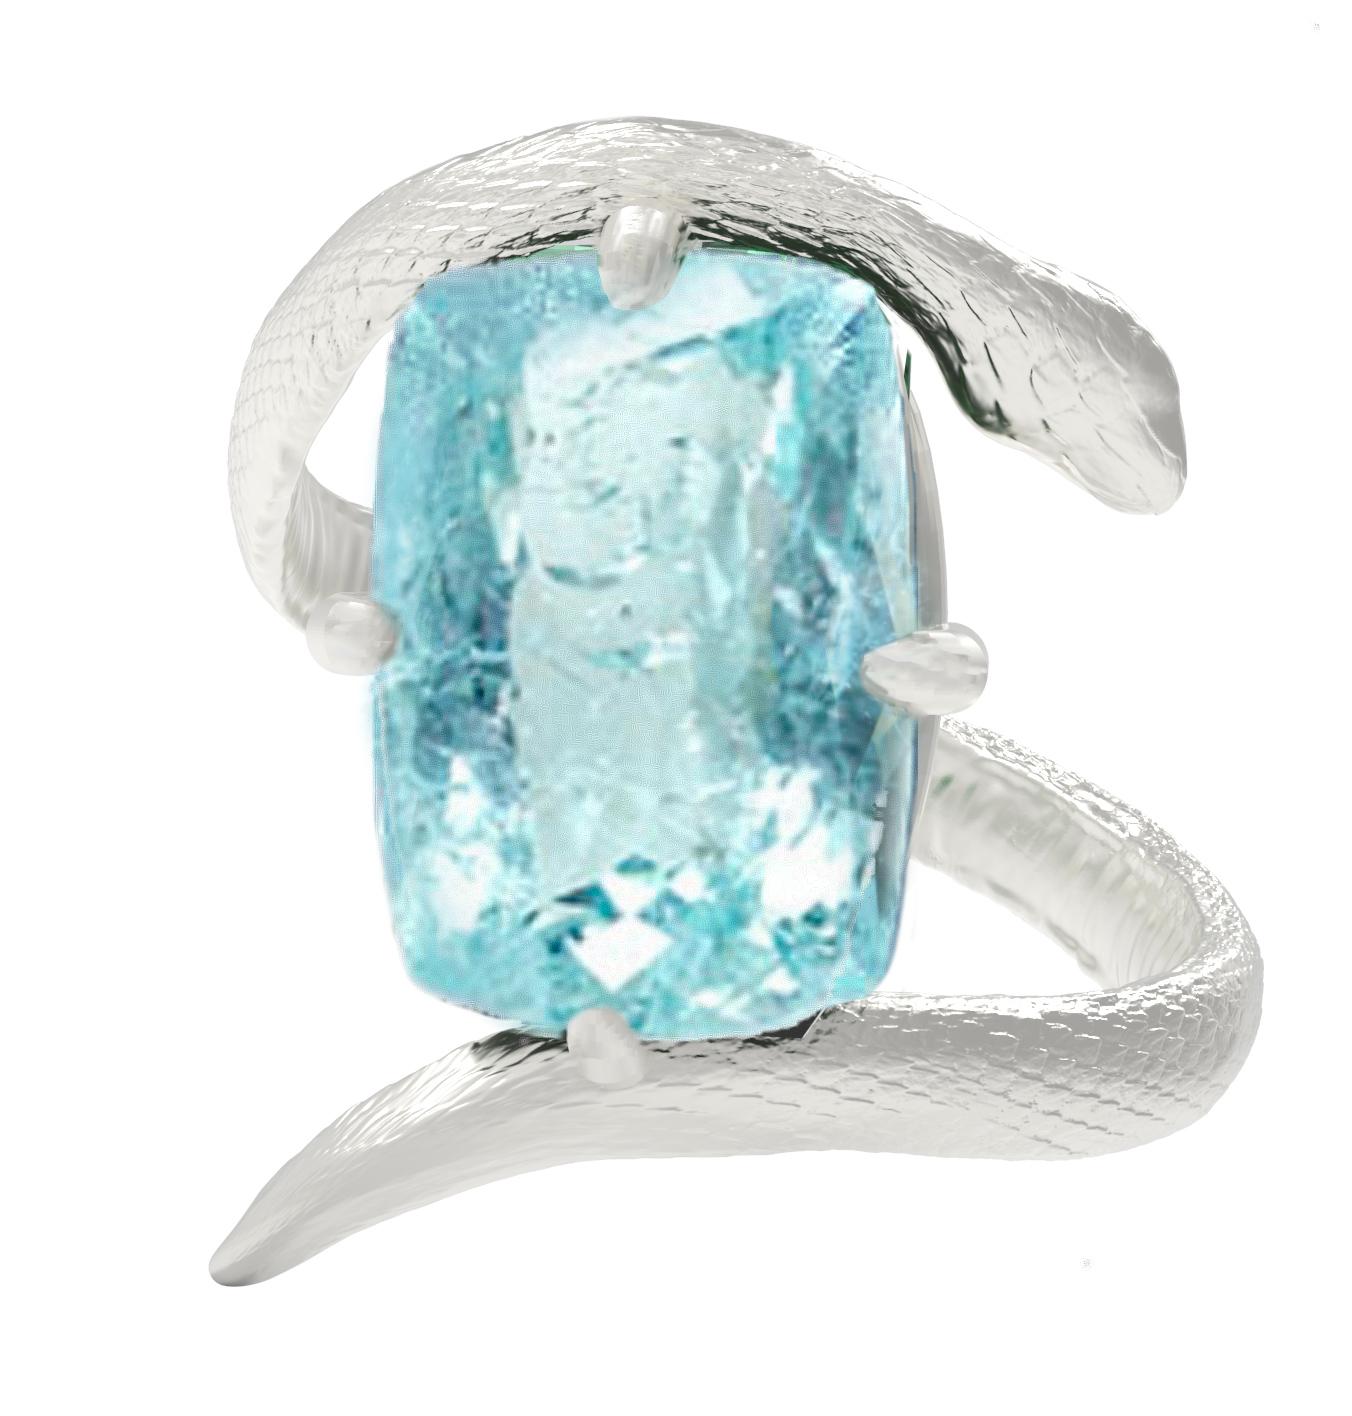 White Gold Egyptian Revival Engagement Ring with Blue Paraiba Tourmaline For Sale 2